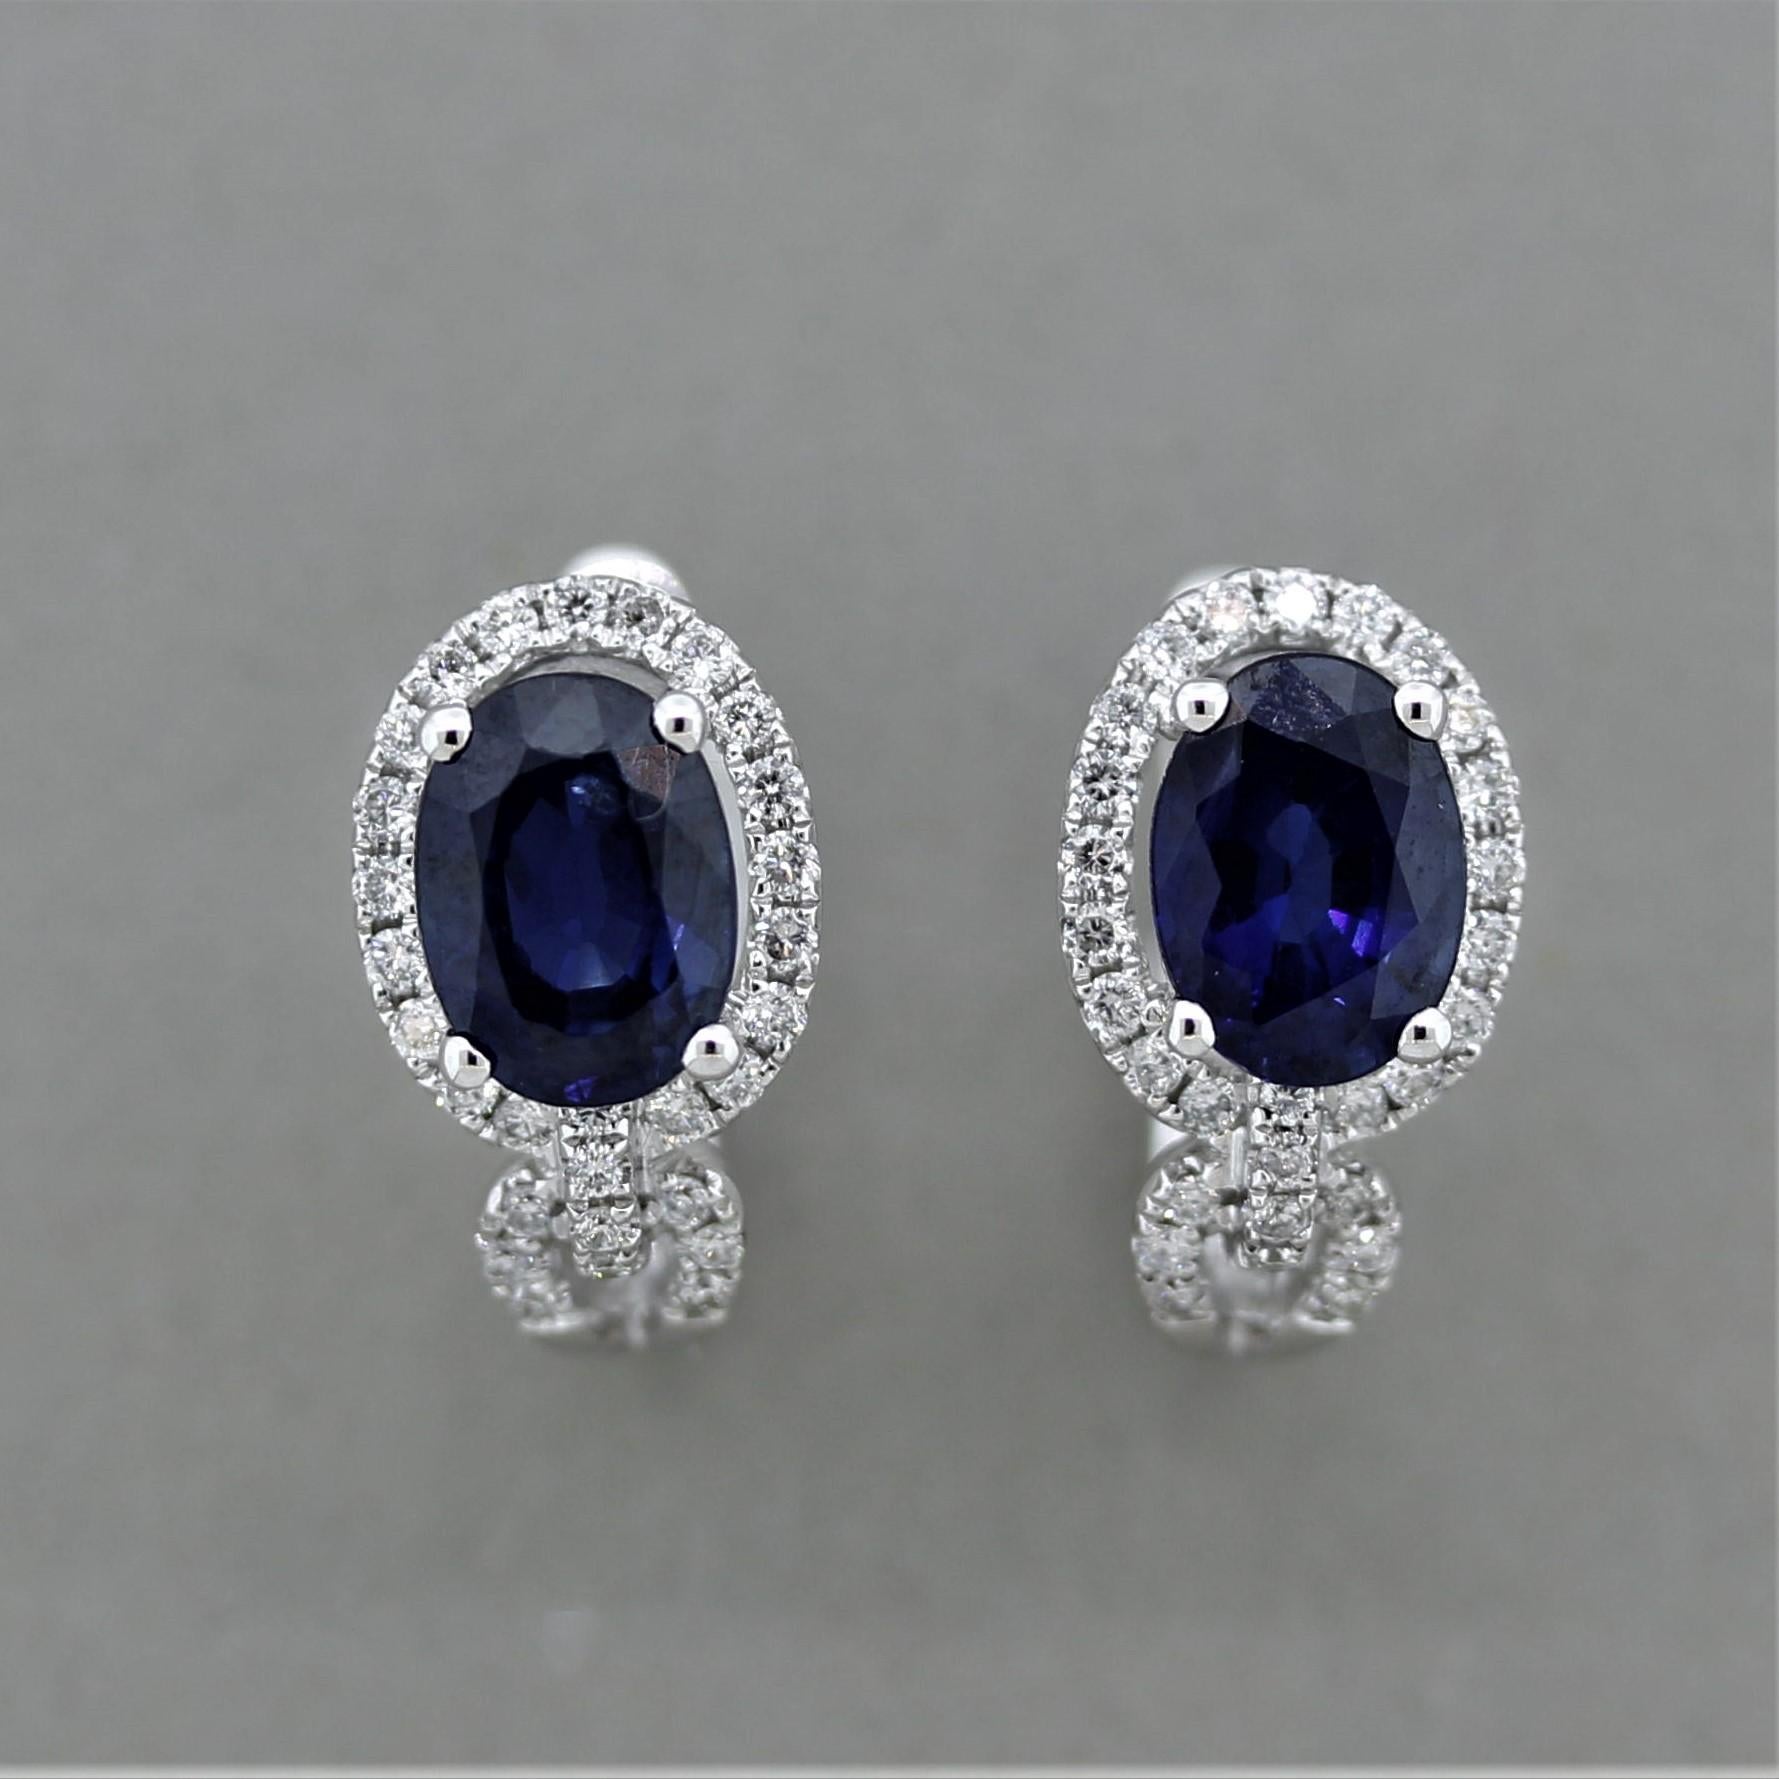 A lovey pair of gold huggie earrings featuring 2.03 carats of oval shaped blue sapphires and 0.29 carats of round brilliant cut diamonds. Made in 18k white gold and ready to be worn!

Length: 0.5 inches